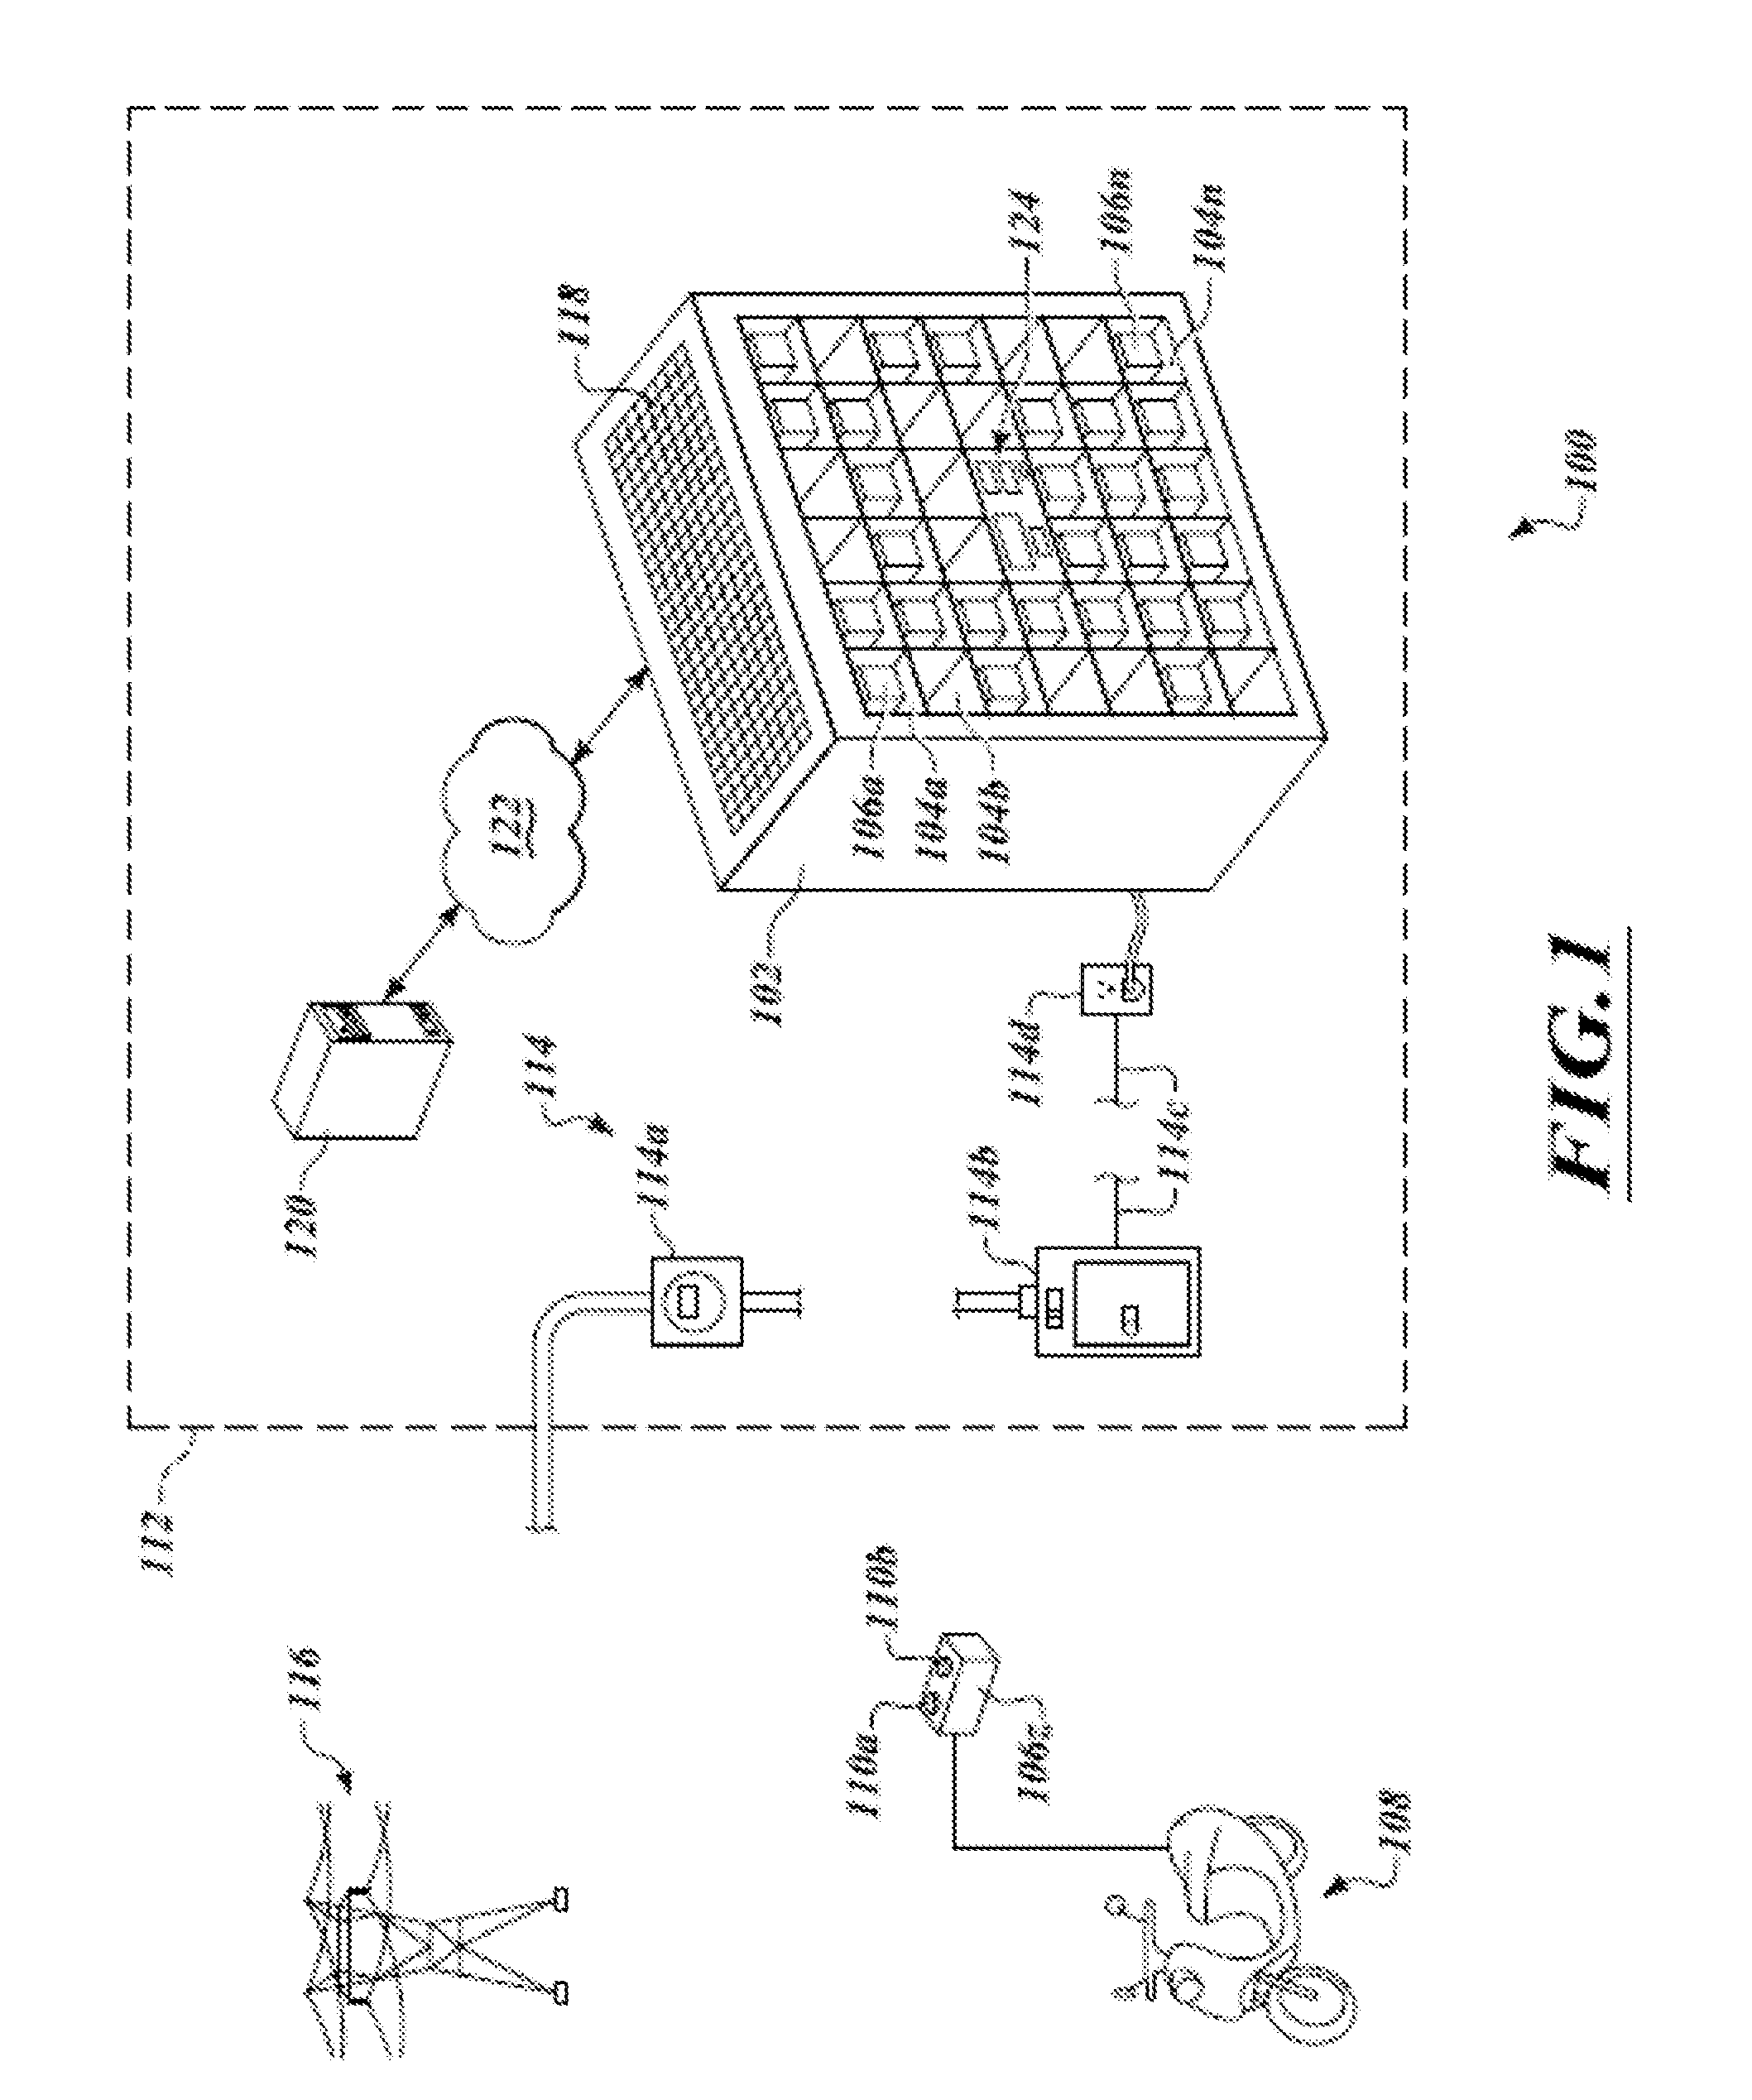 Apparatus, method and article for providing vehicle diagnostic data